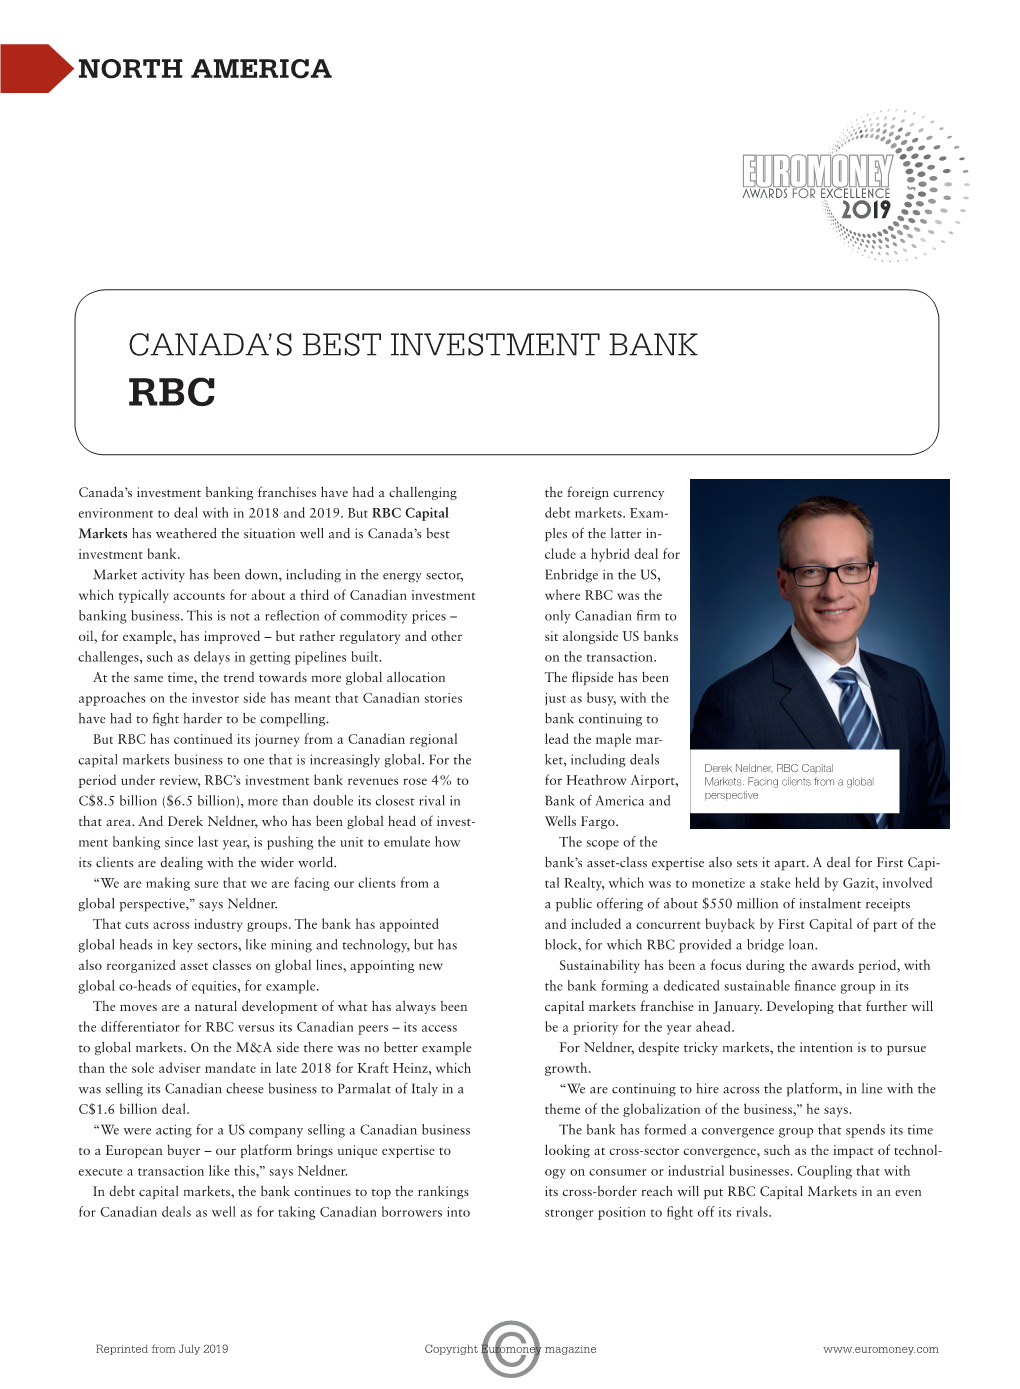 Canada's Best Investment Bank